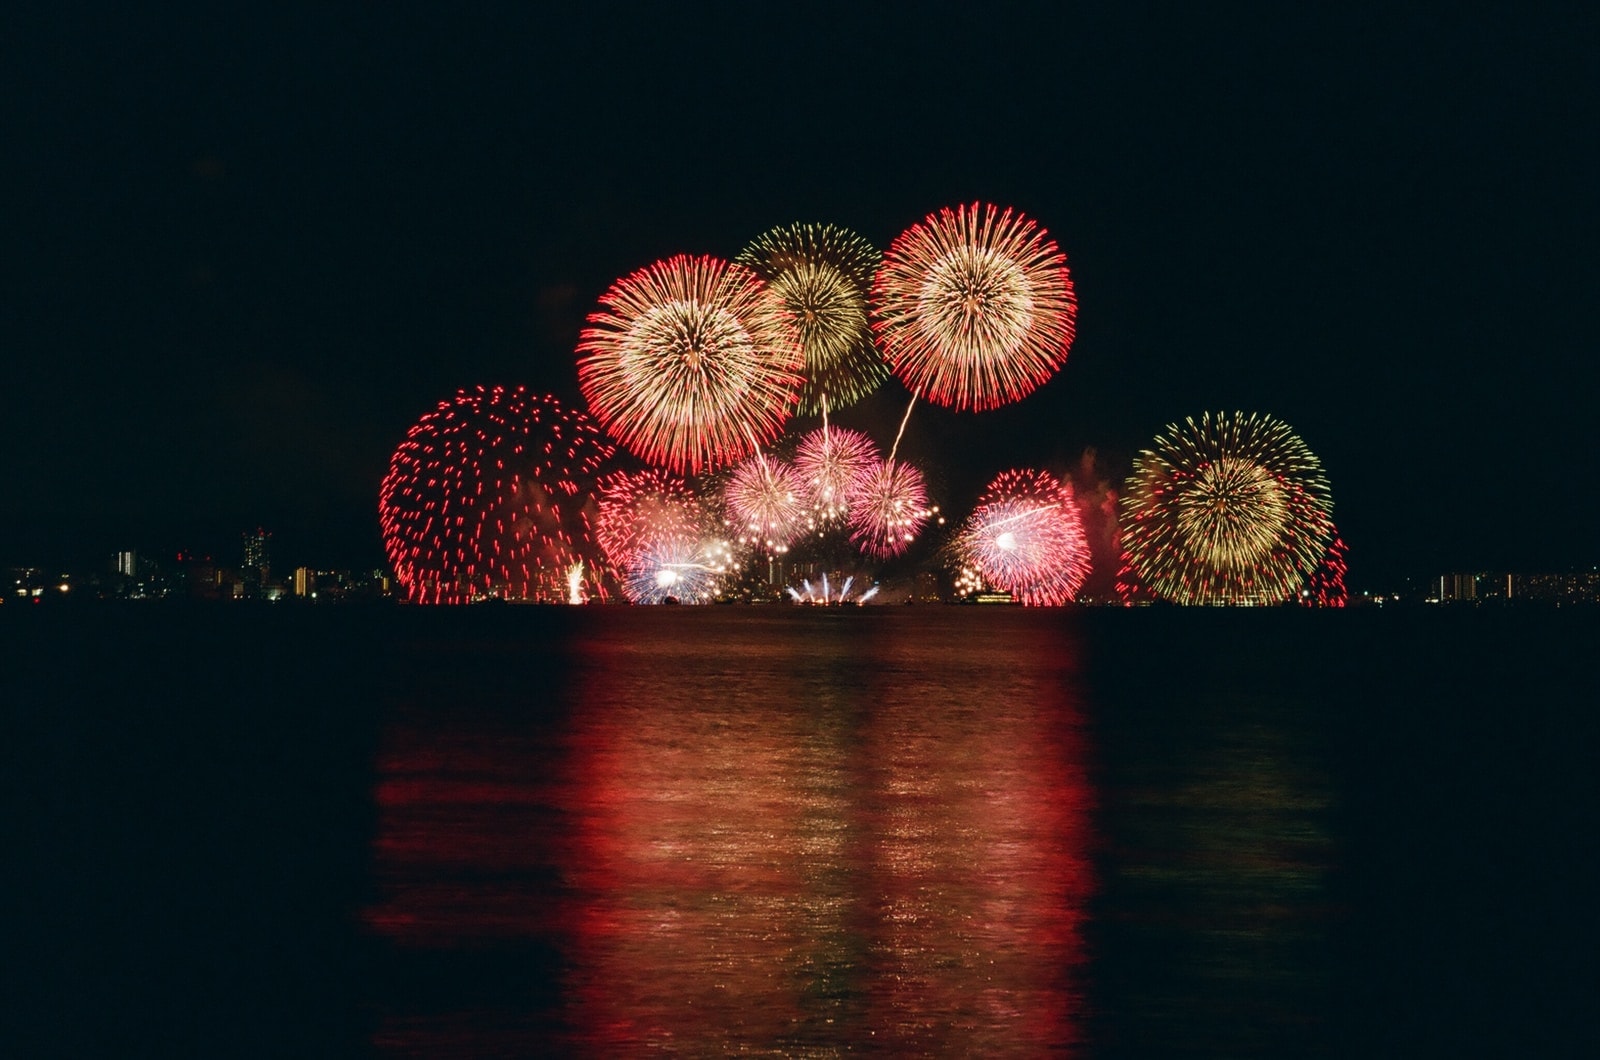 mirror photography of fireworks display